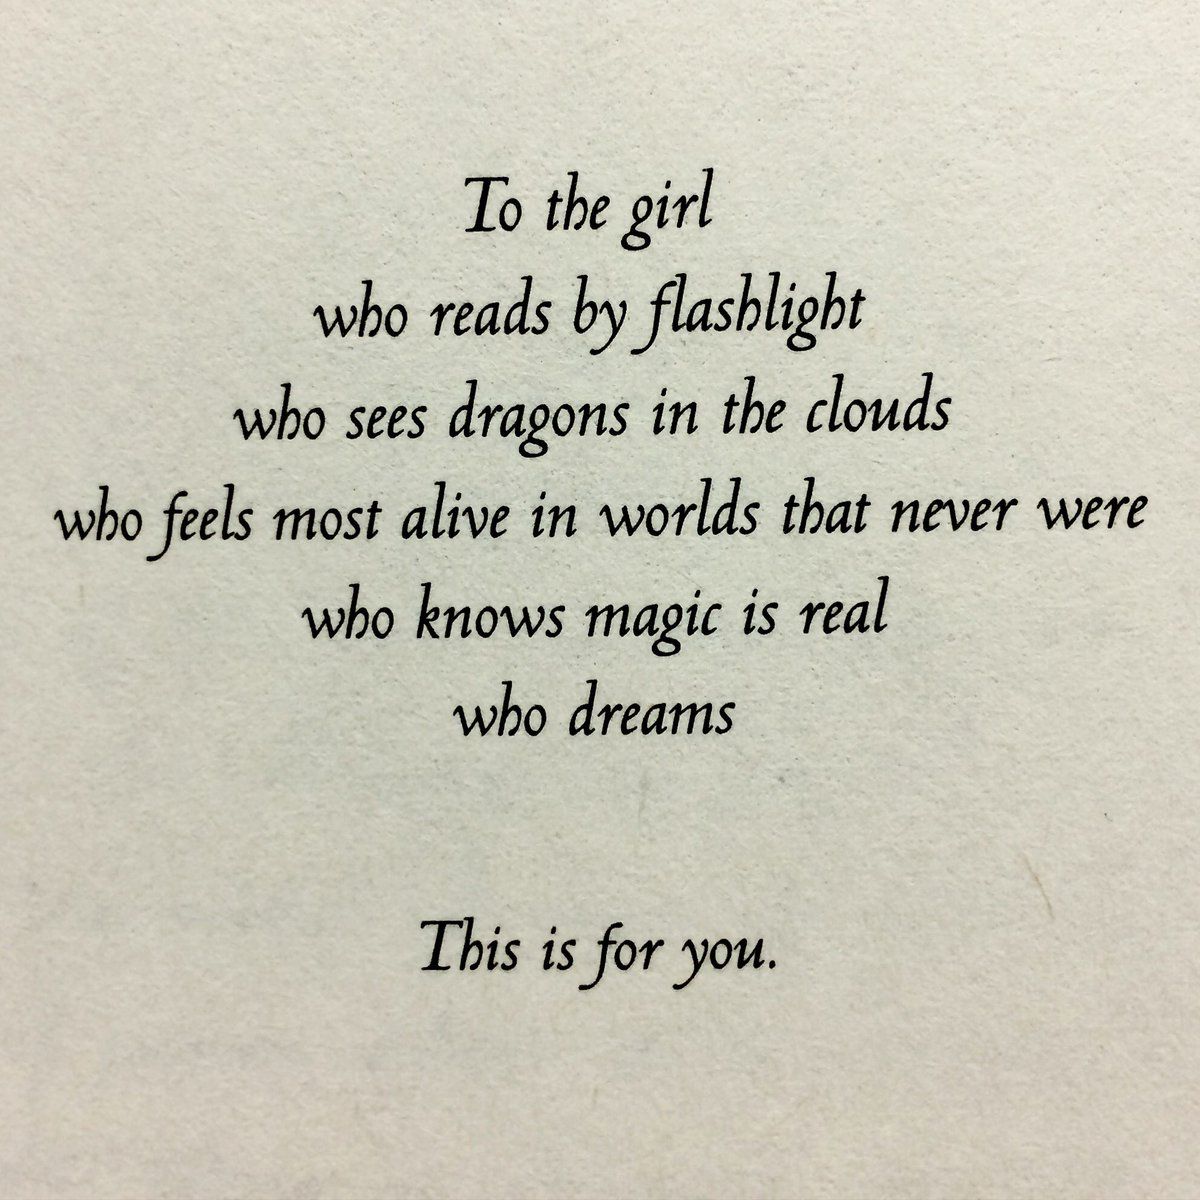 to the girl who reads by flaslight who sees dragons in the clouds who feels most alive in worlds that never were who knows magic is real who dreams.